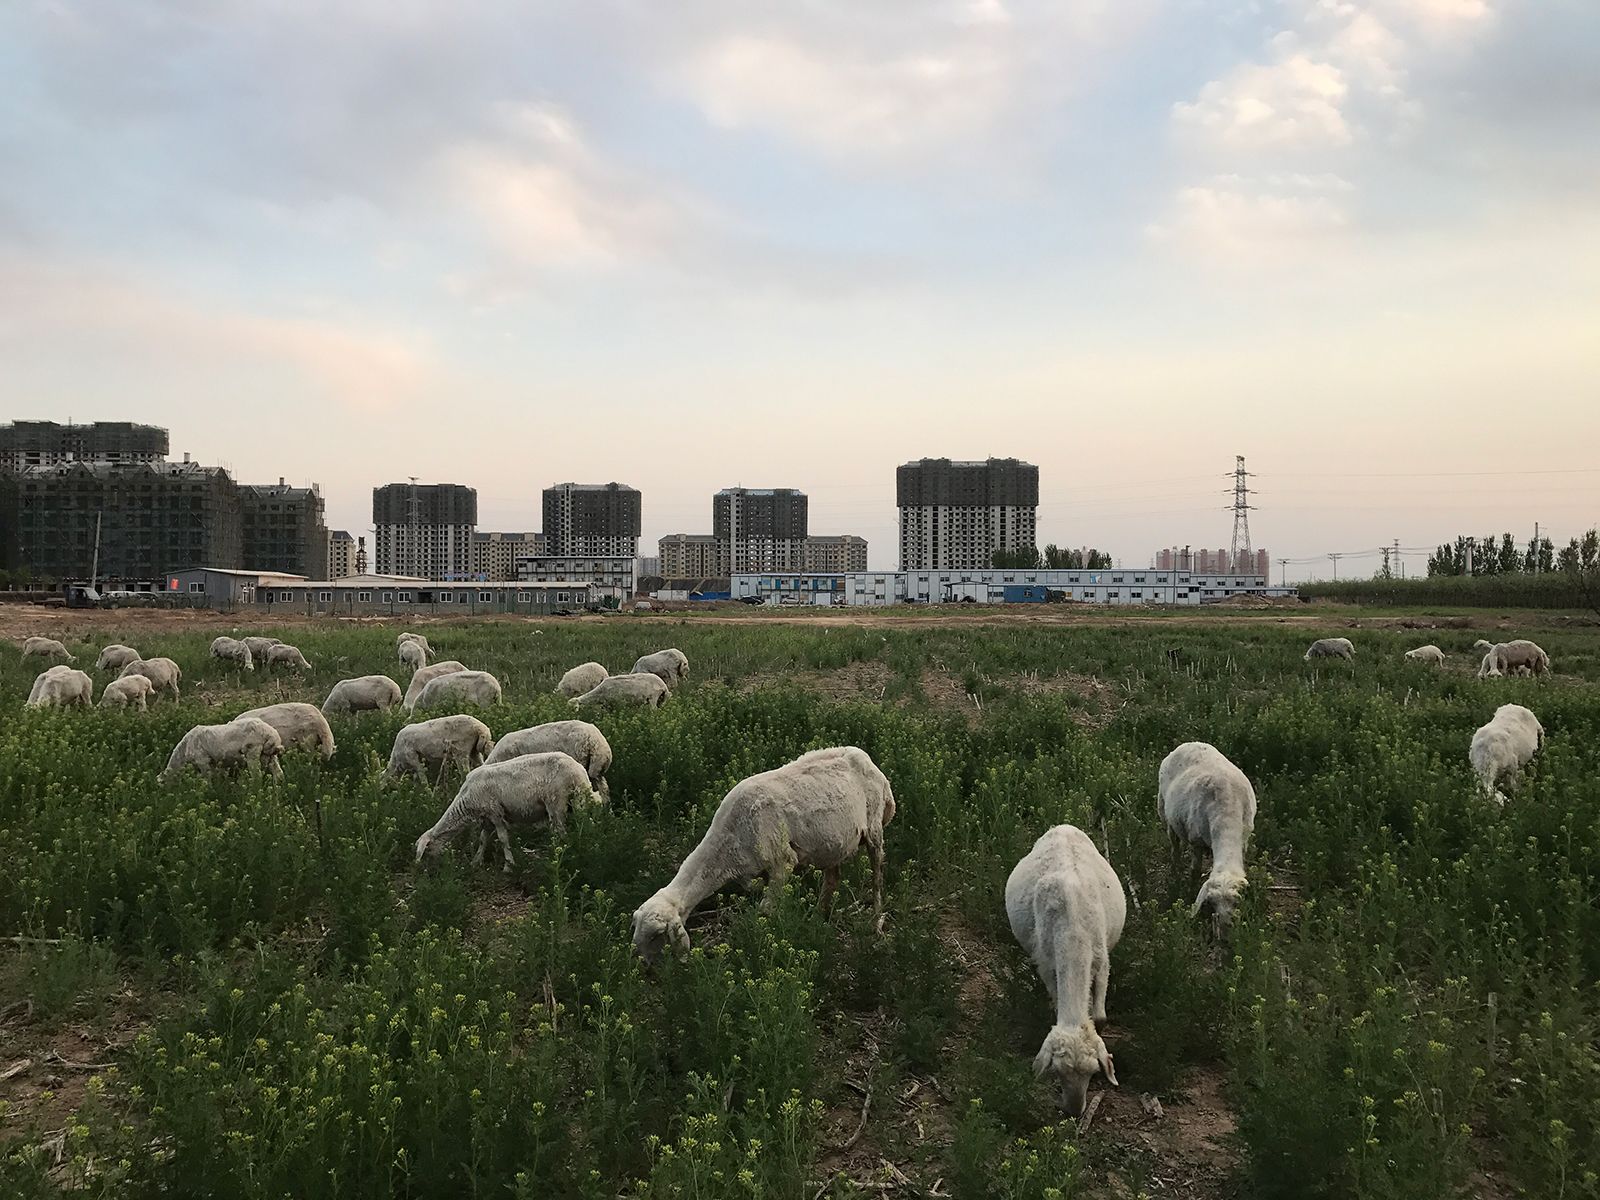 Sheep grazing on grass on the idled construction site of a high-end residential real estate project in Hebei province in April 2017. The project was suspended after the central government announced its decision to build the Xiong'an New Area.